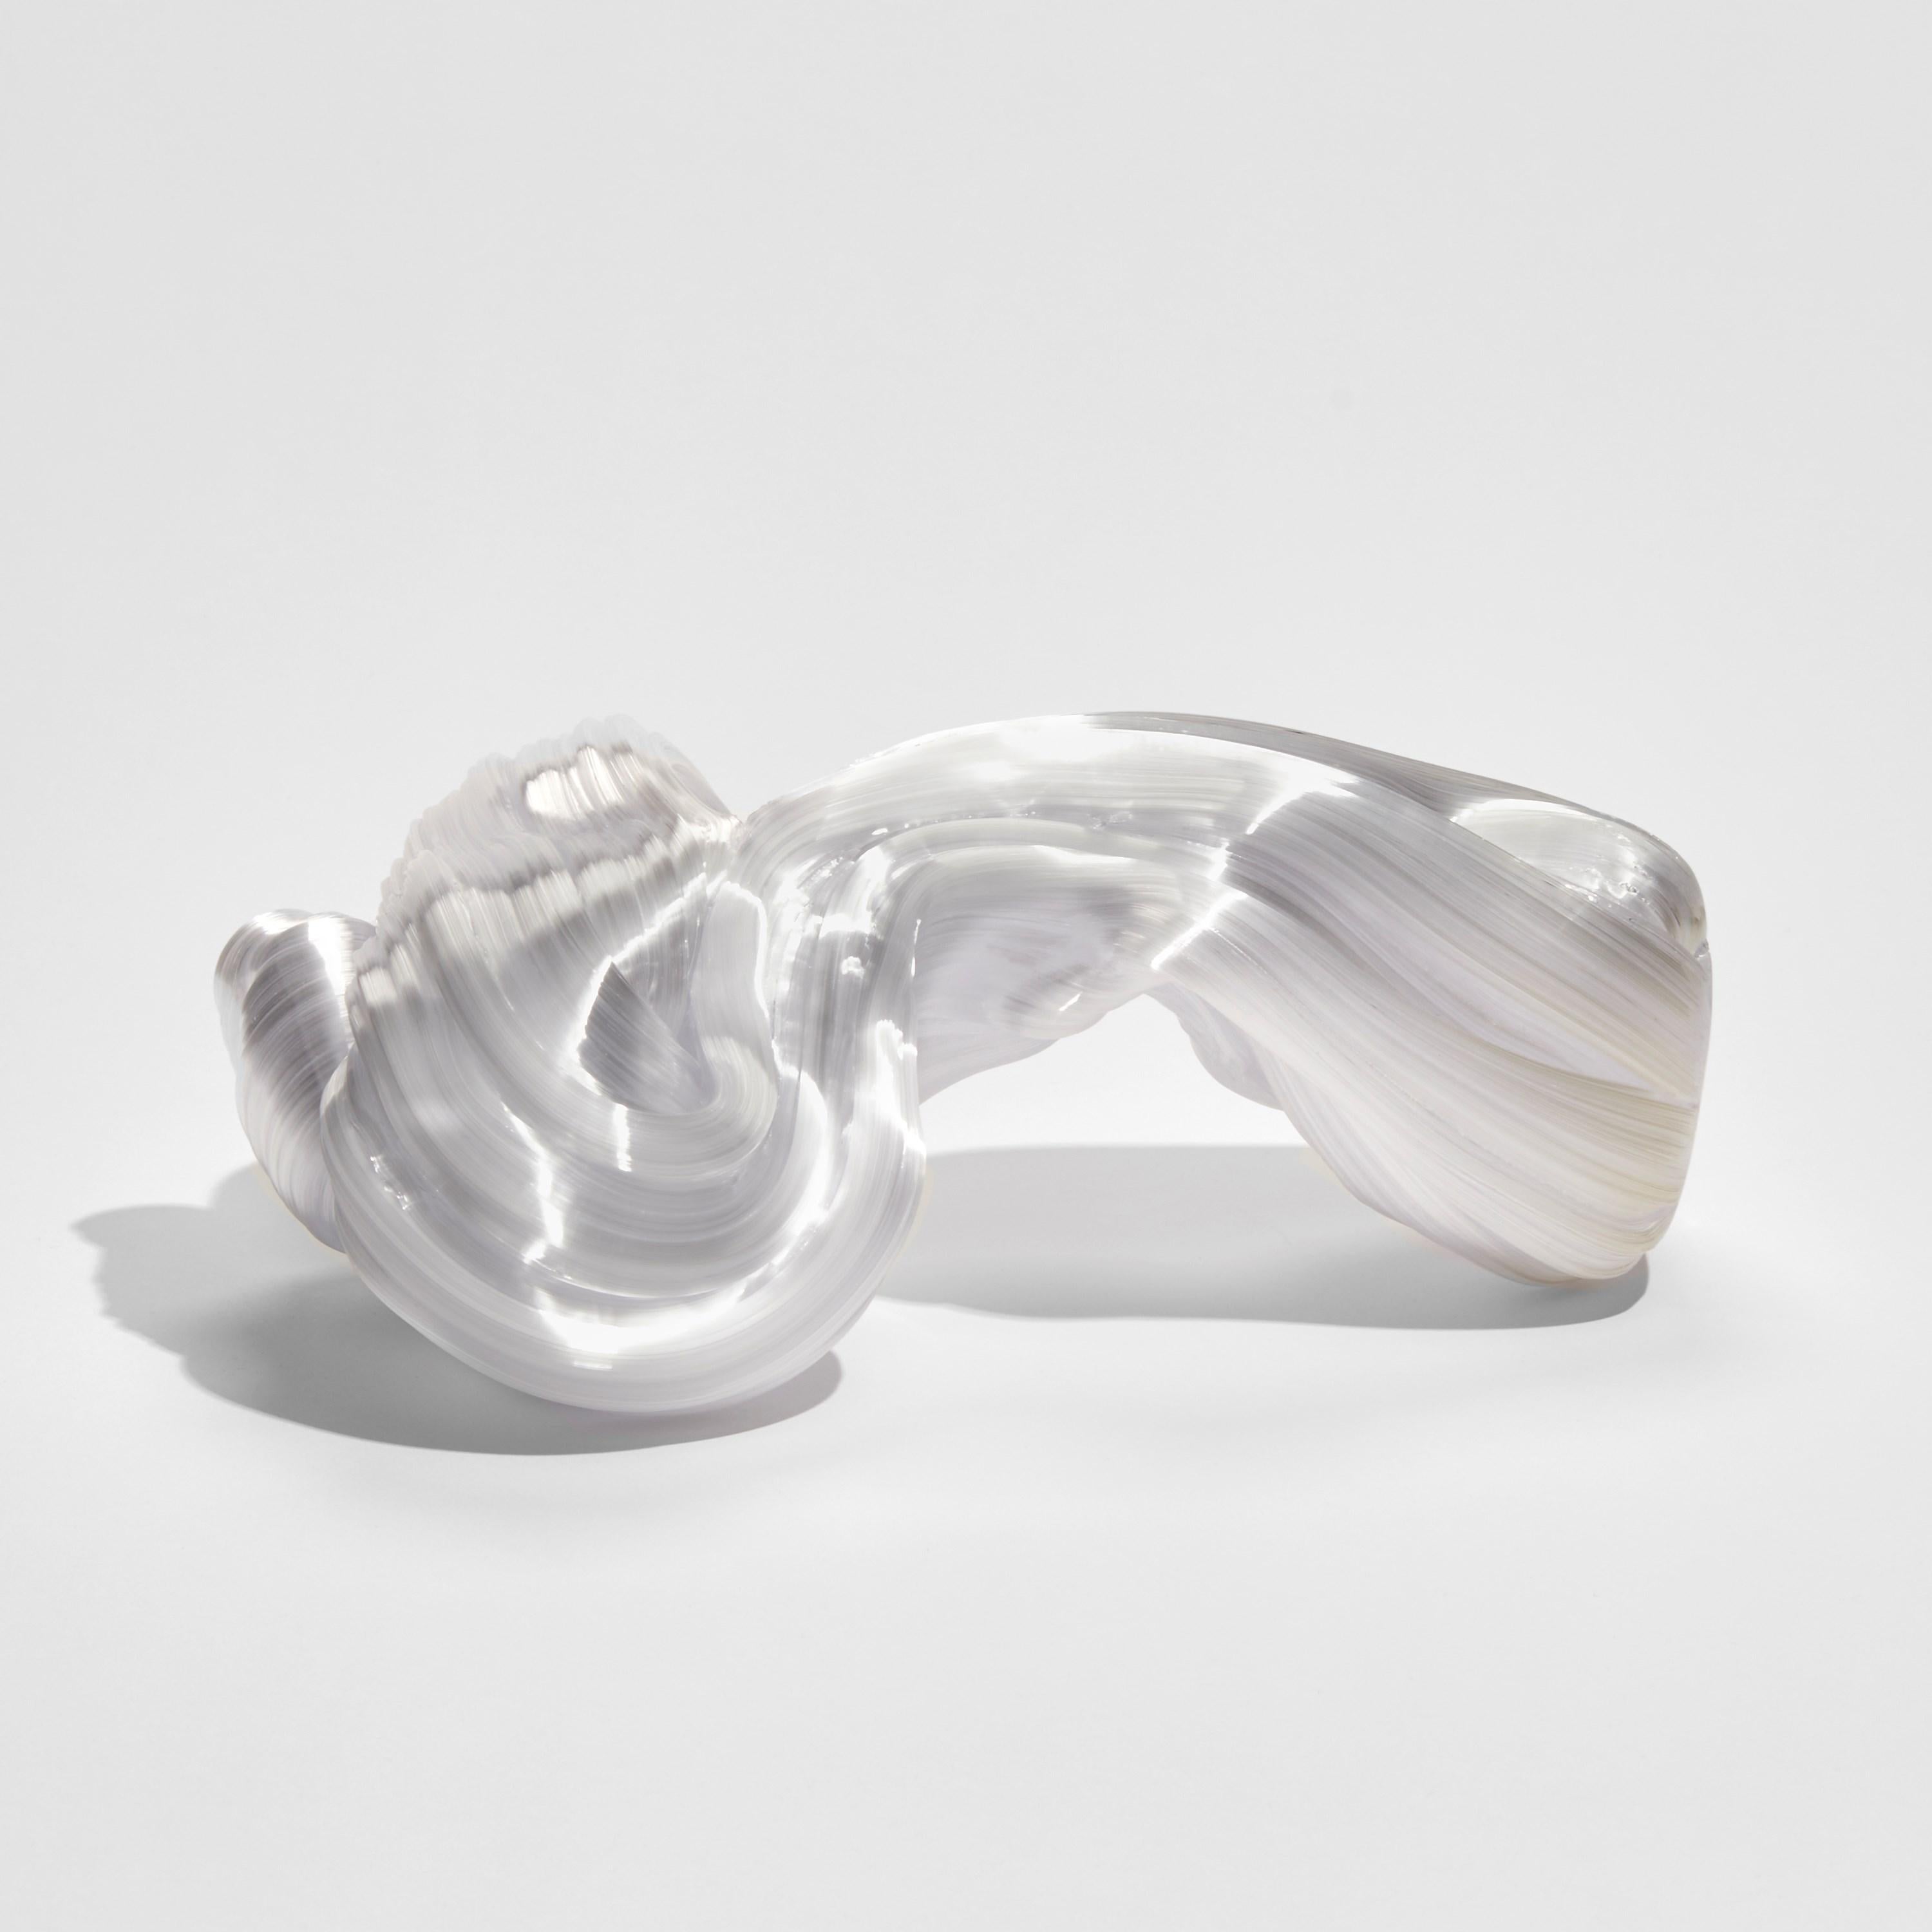 Organic Modern  Around in White, a Unique Abstract Glass Sculpture by Maria Bang Espersen